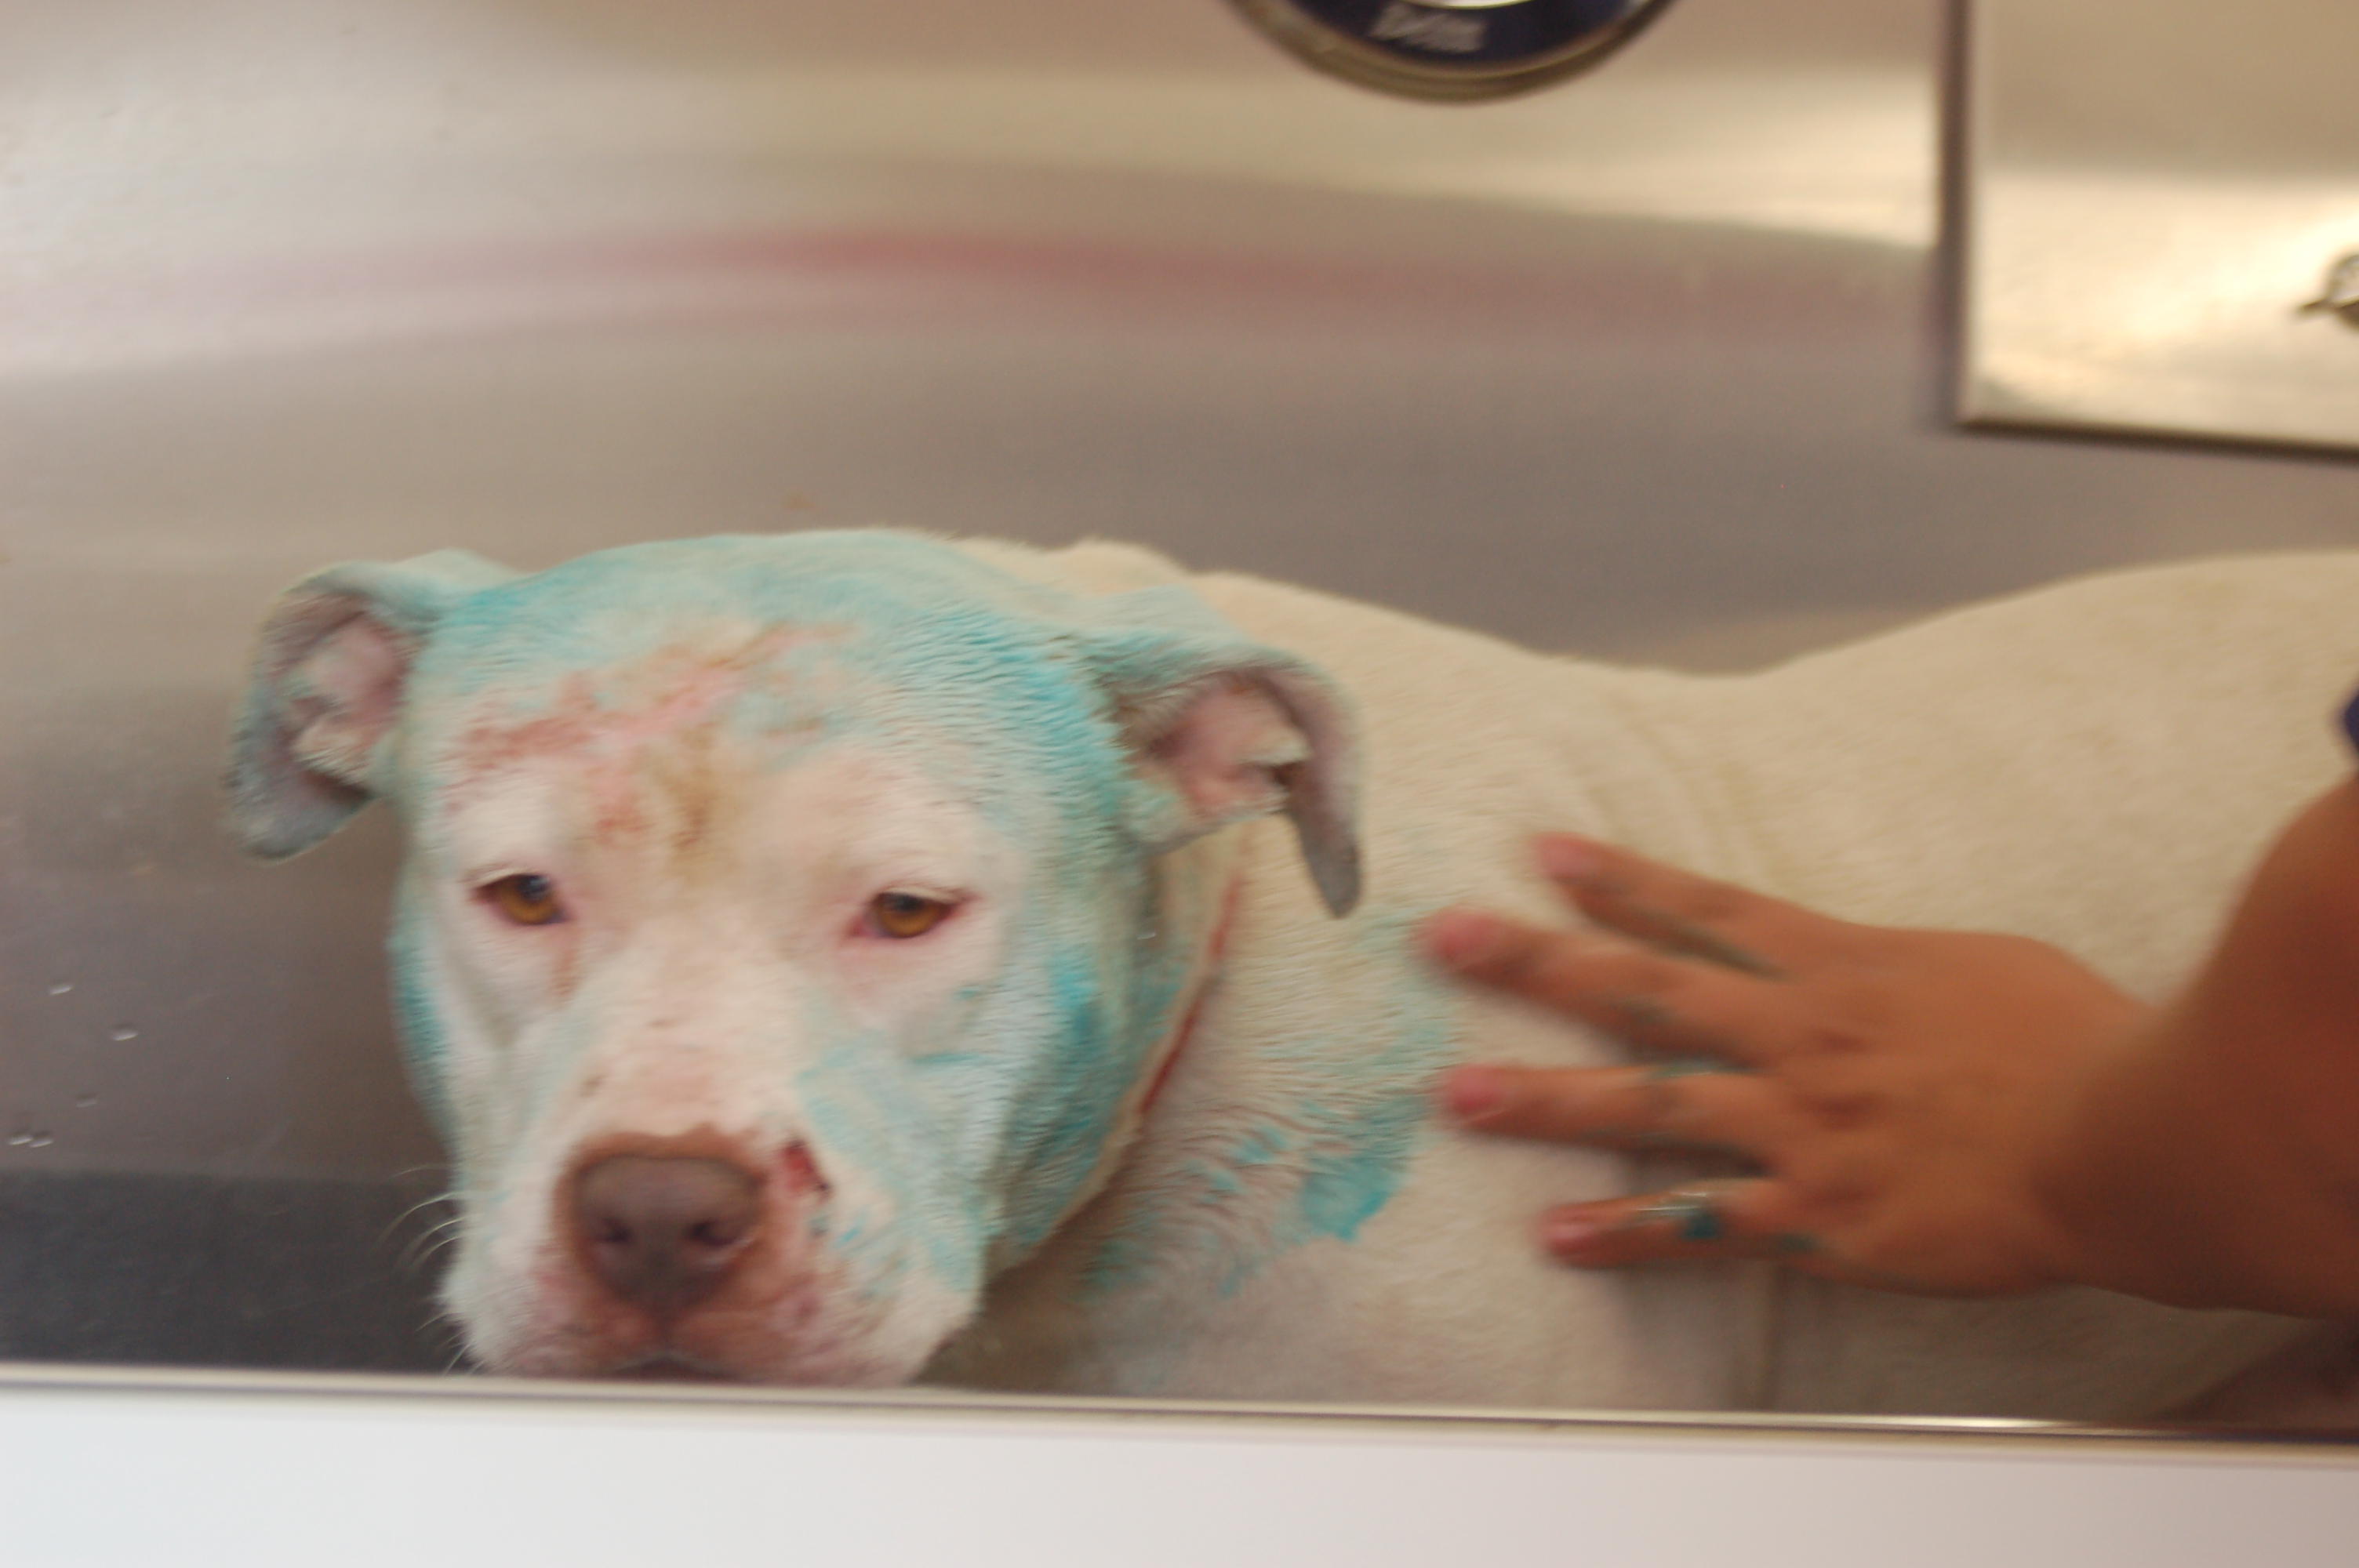 A white dog is pampered at a Grooming Station.